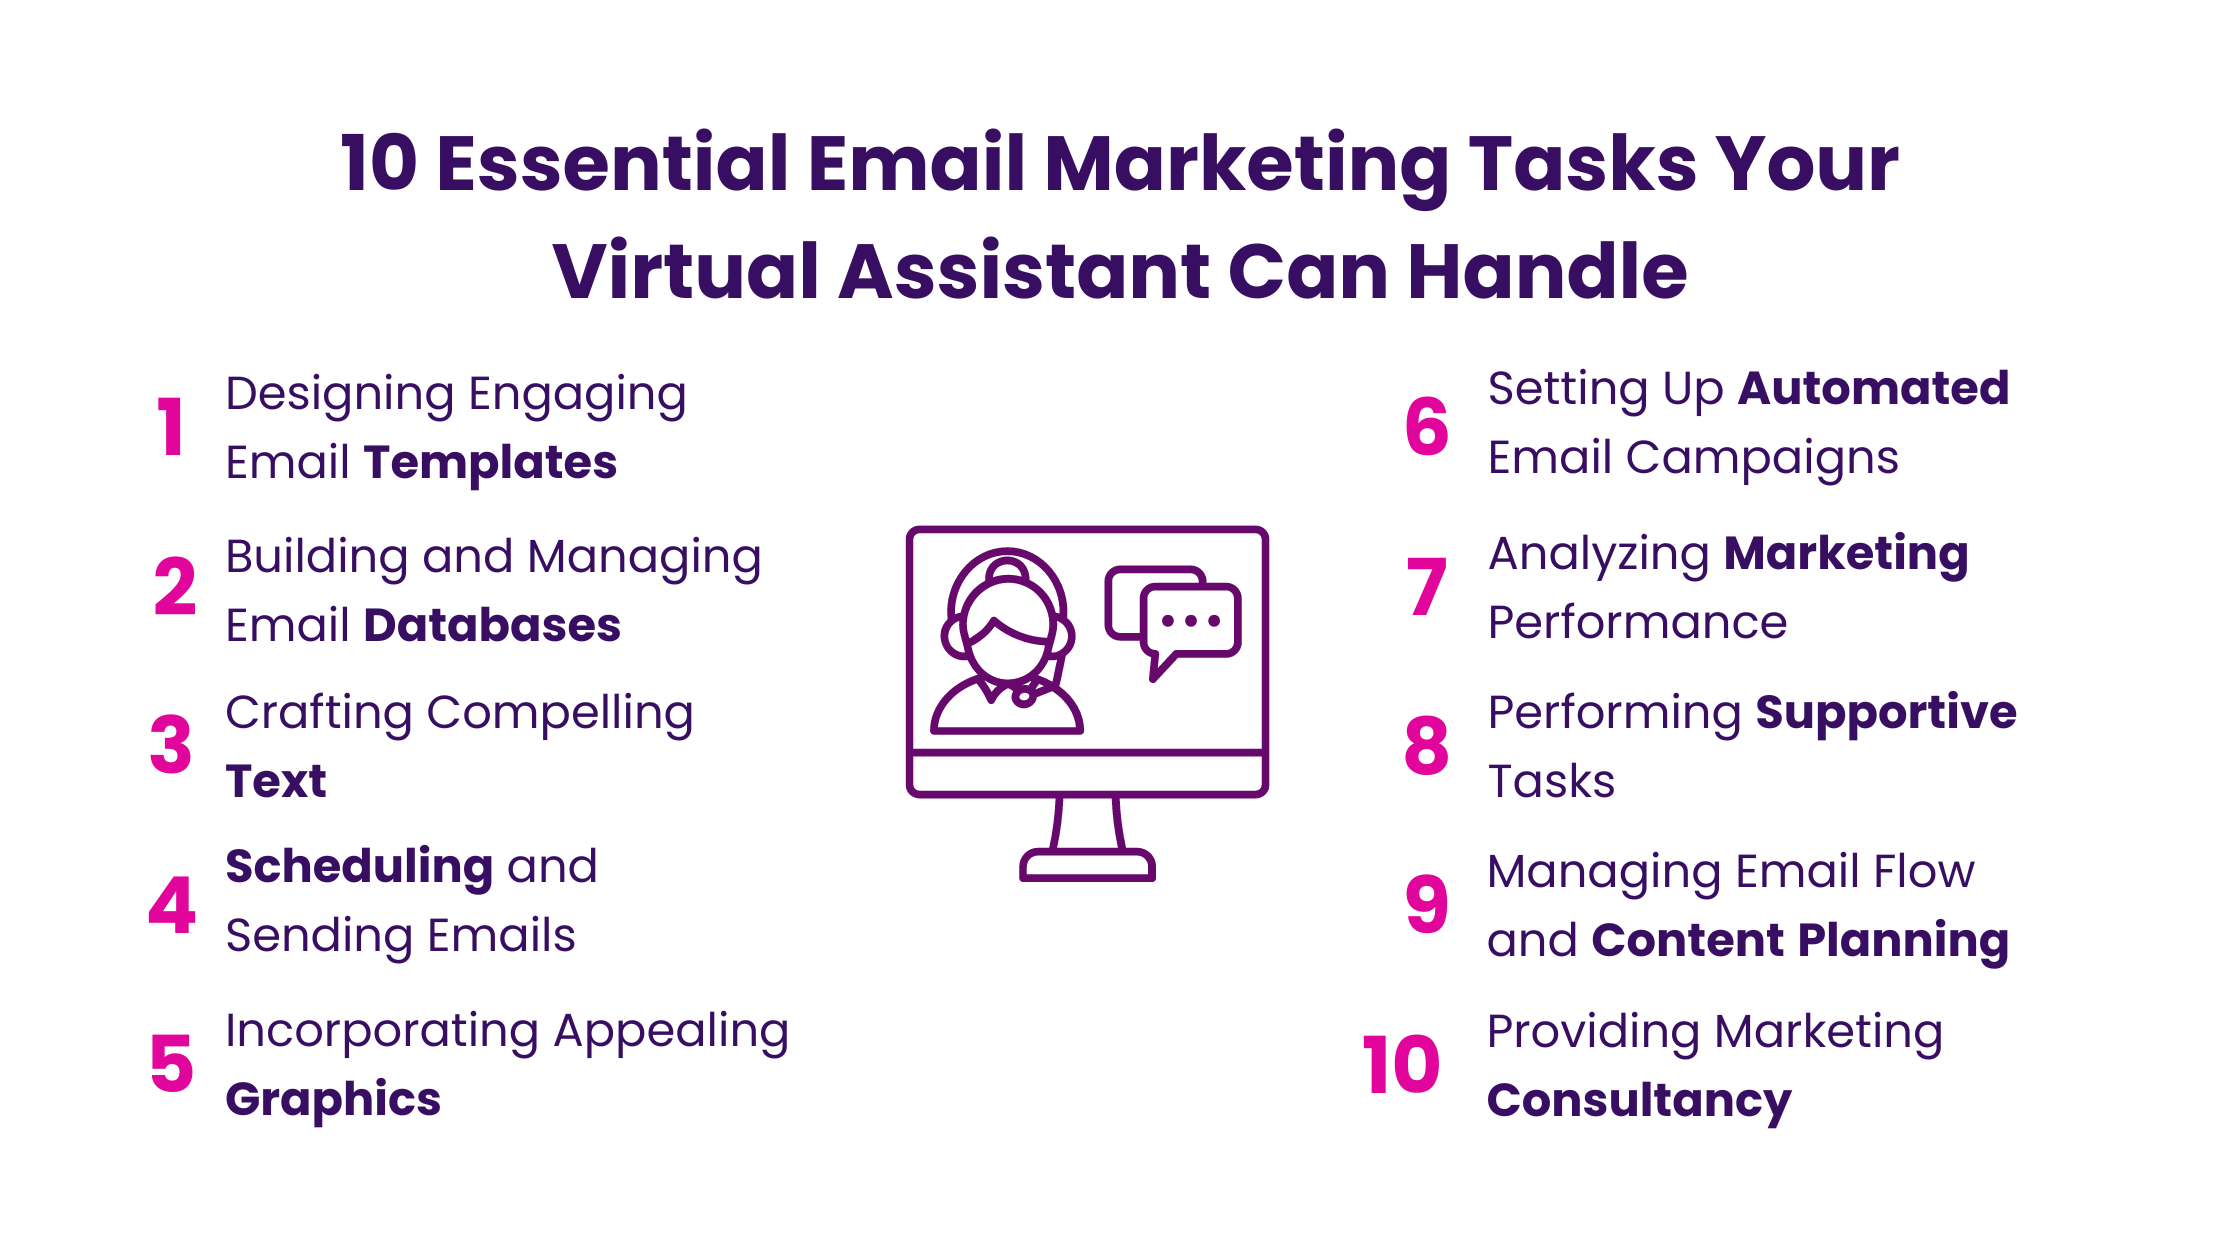 10 Essential Email Marketing Tasks Your Virtual Assistant Can Handle